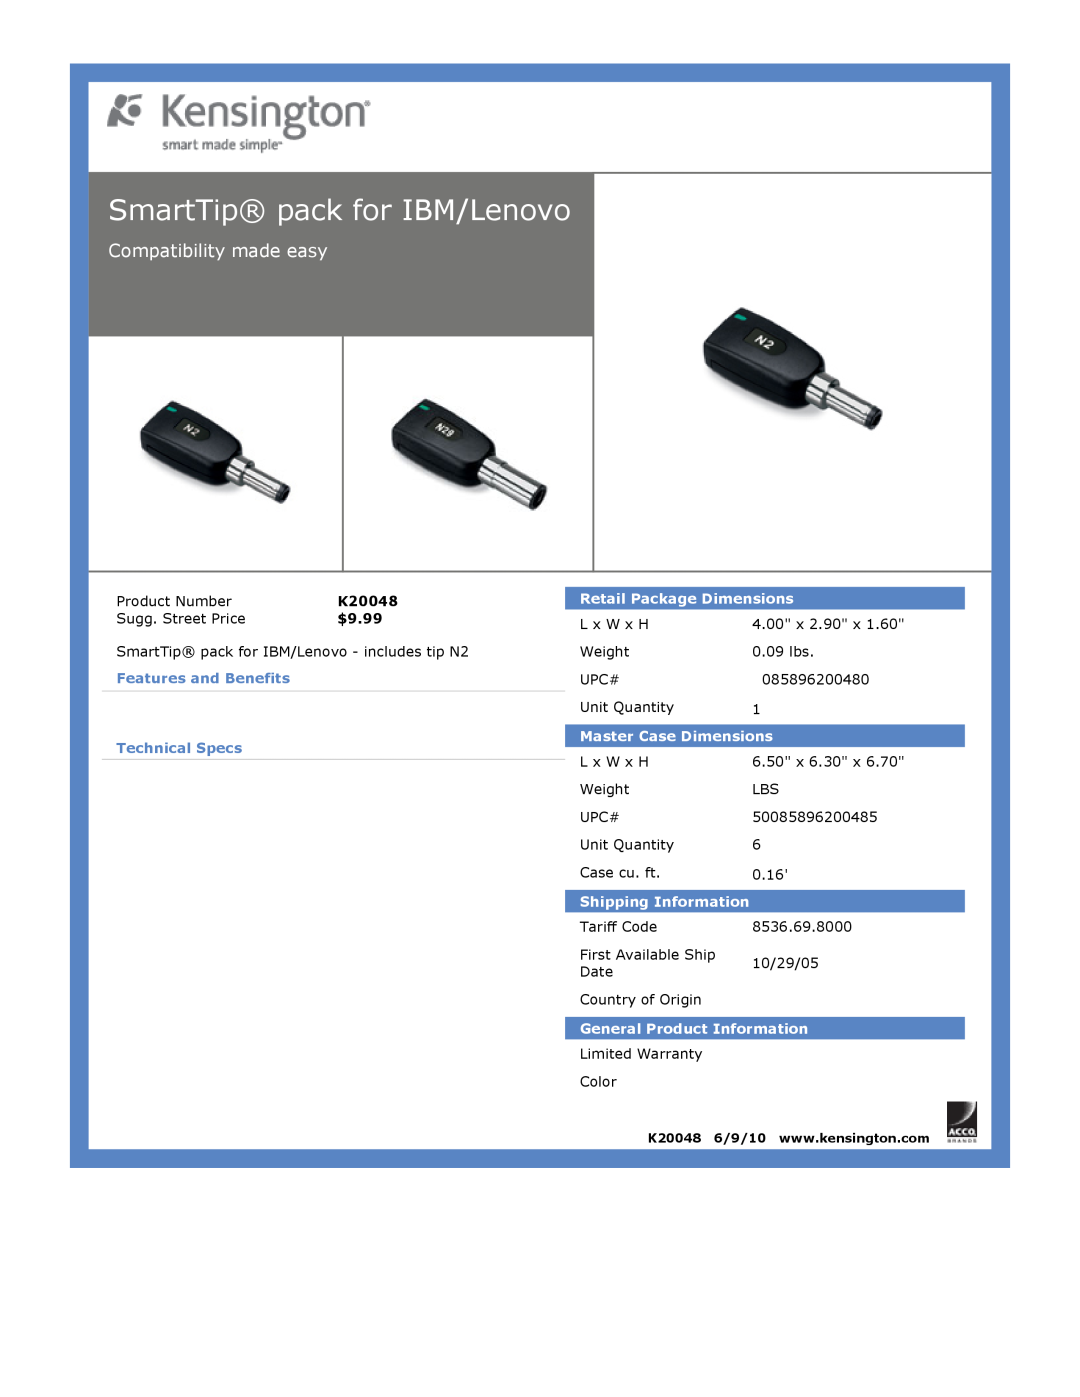 Kensington EU64325 SmartTip pack for IBM/Lenovo, Compatibility made easy, $9.99, Features and Benefits Technical Specs 